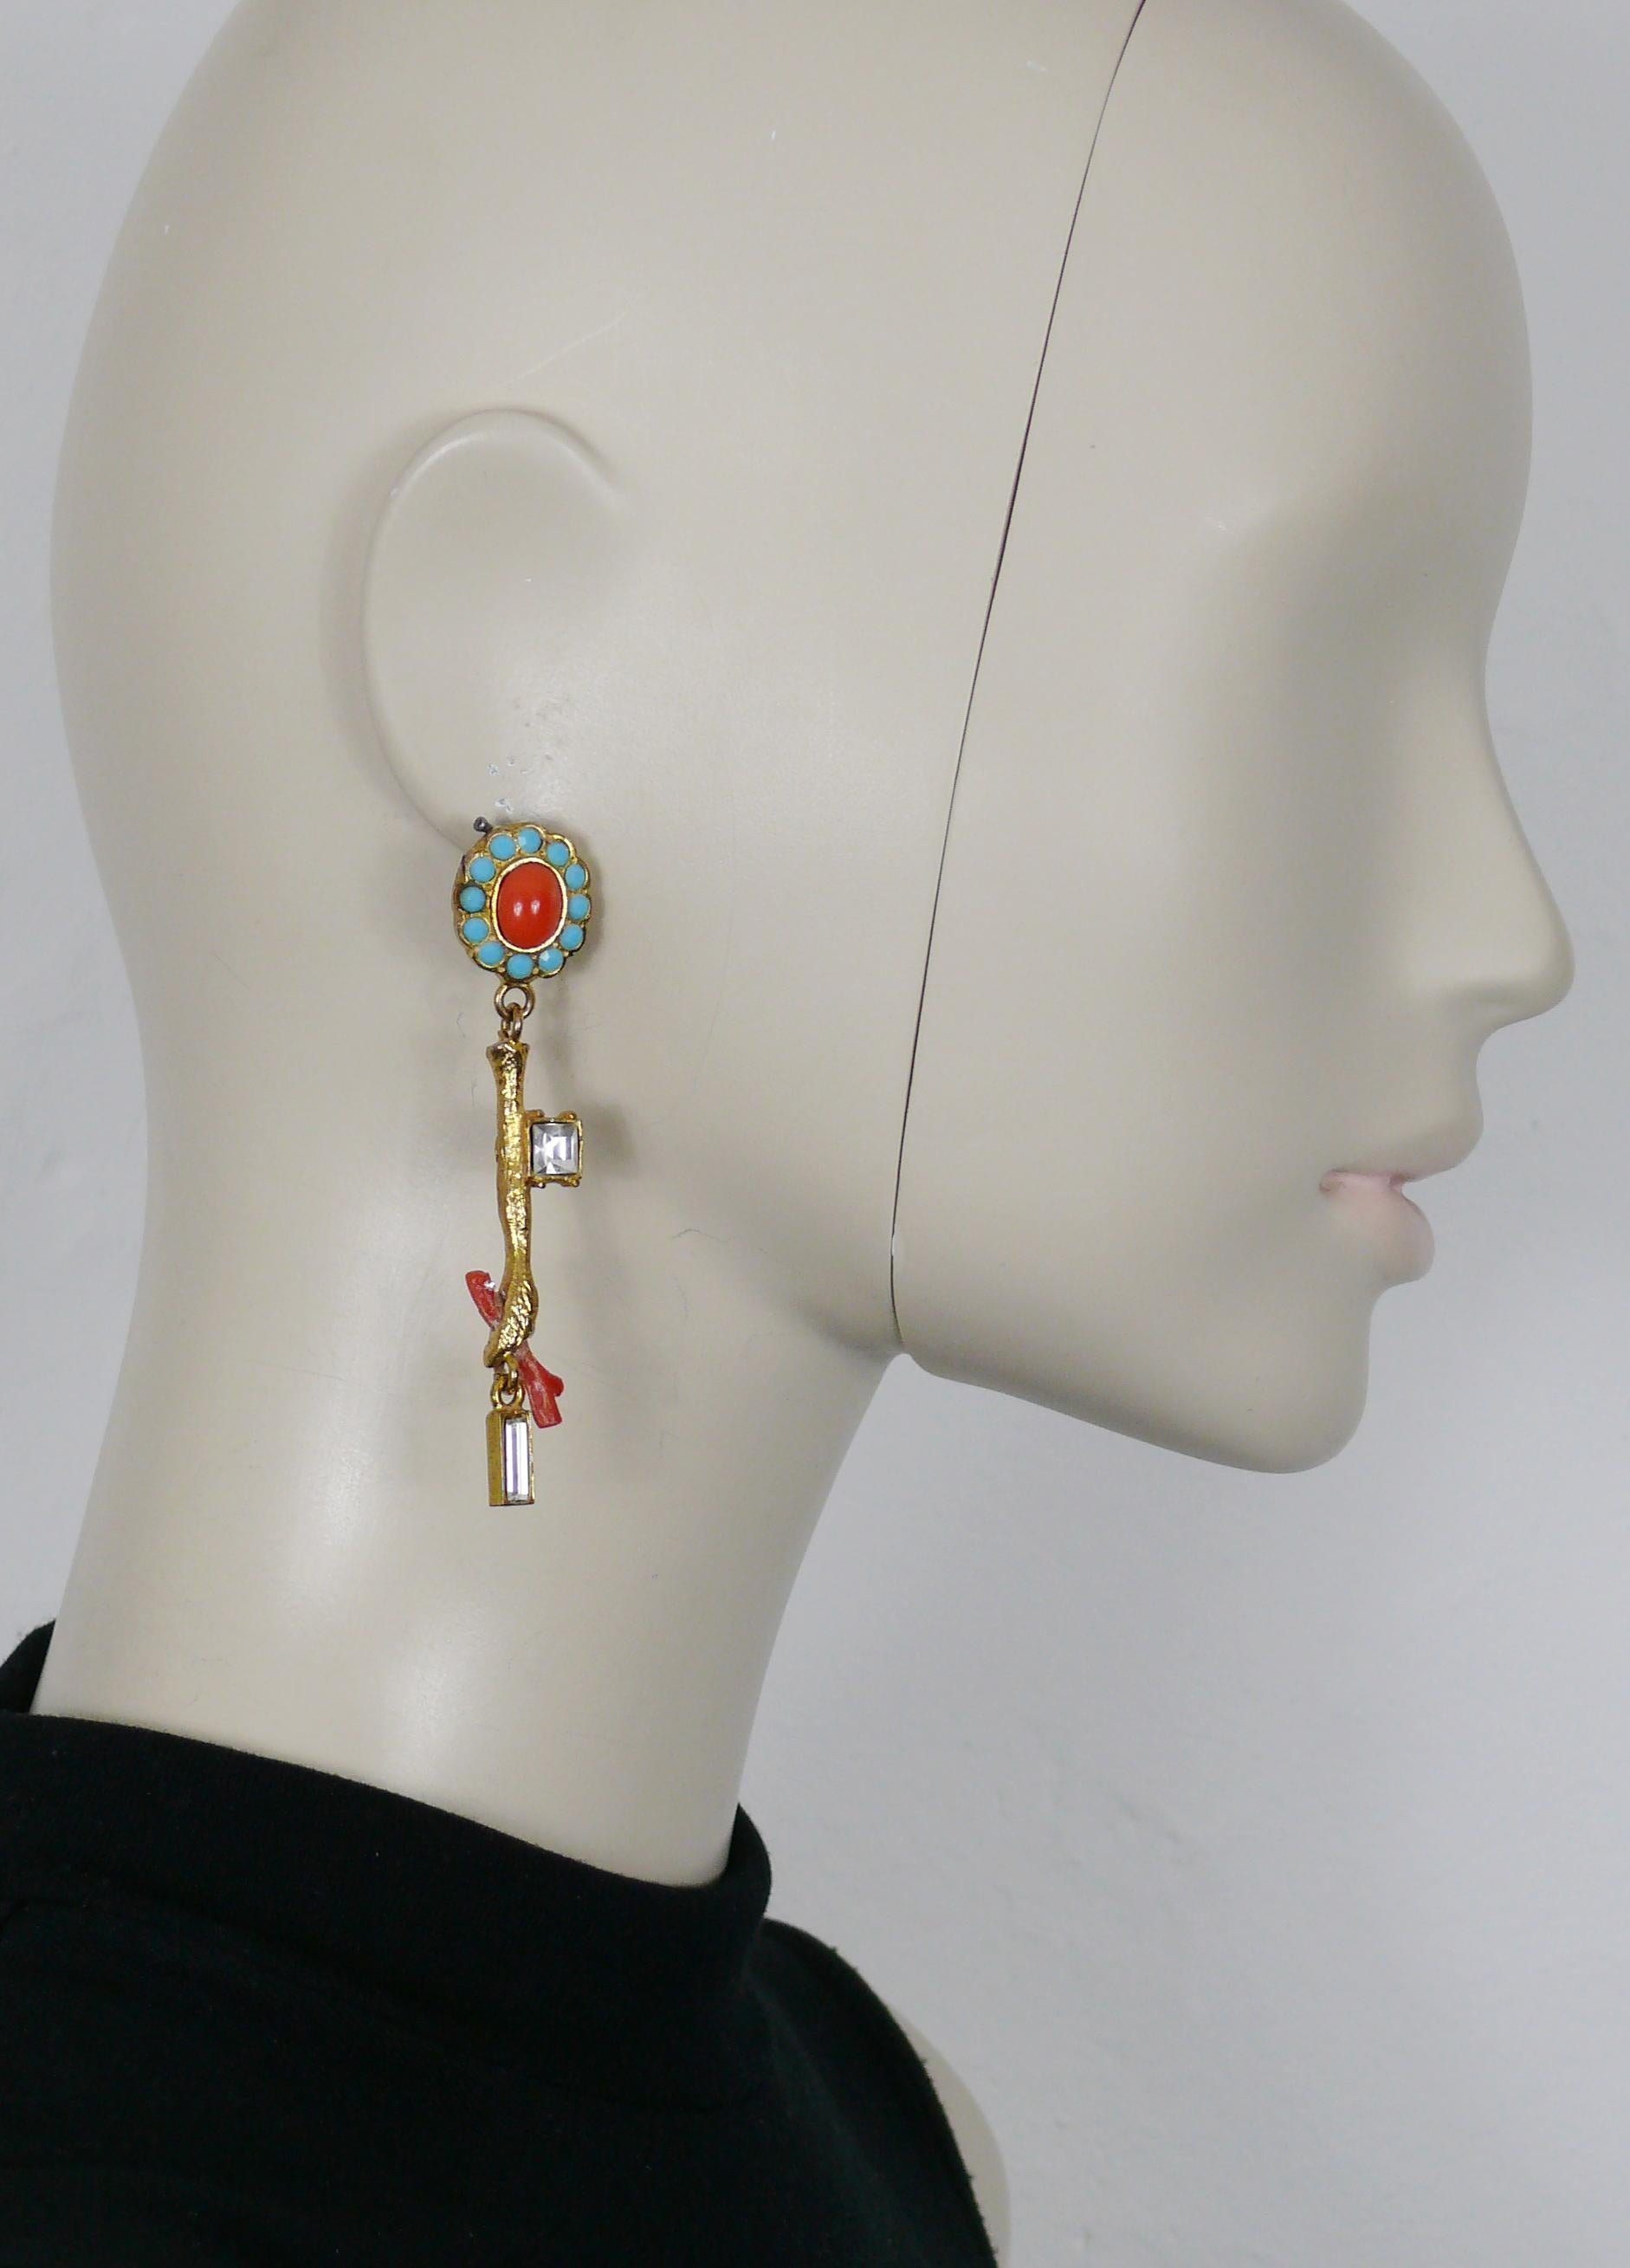 CHRISTIAN LACROIX vintage gold tone dangling earrings (clip-on) embellished with multicolored crystals, glass cabochon and resin faux coral branch.

Marked CHRISTIAN LACROIX CL Made in France.

Indicative measurements : max. height approx. 8 cm